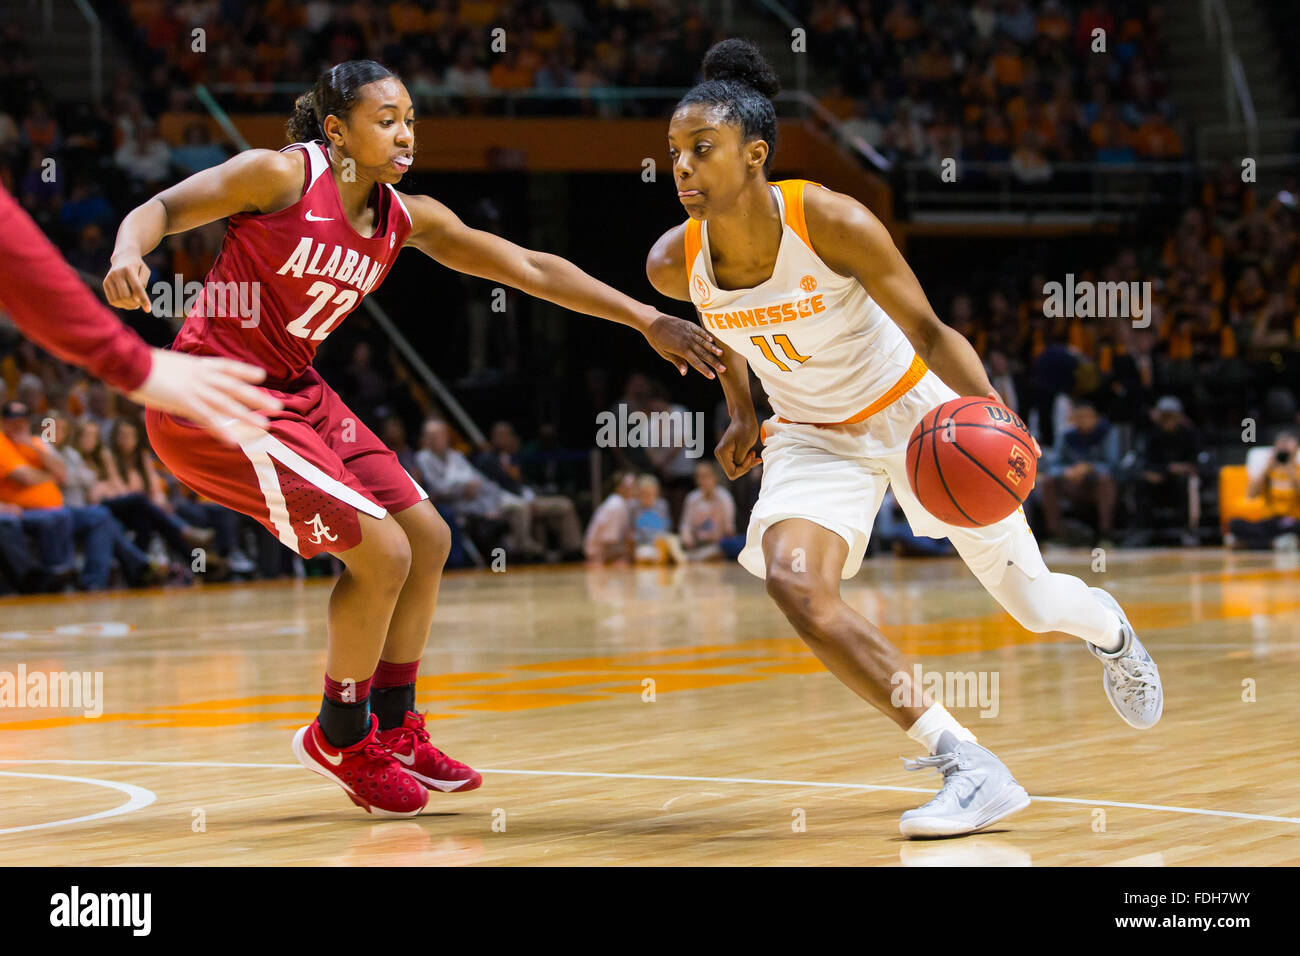 January 31, 2016: Diamond DeShields #11 of the Tennessee Lady Volunteers drives to the basket against Karyla Middlebrook #22 of the Alabama Crimson Tide during the NCAA basketball game between the University of Tennessee Lady Volunteers and the University of Alabama Crimson Tide at Thompson Boling Arena in Knoxville TN Tim Gangloff/CSM Stock Photo